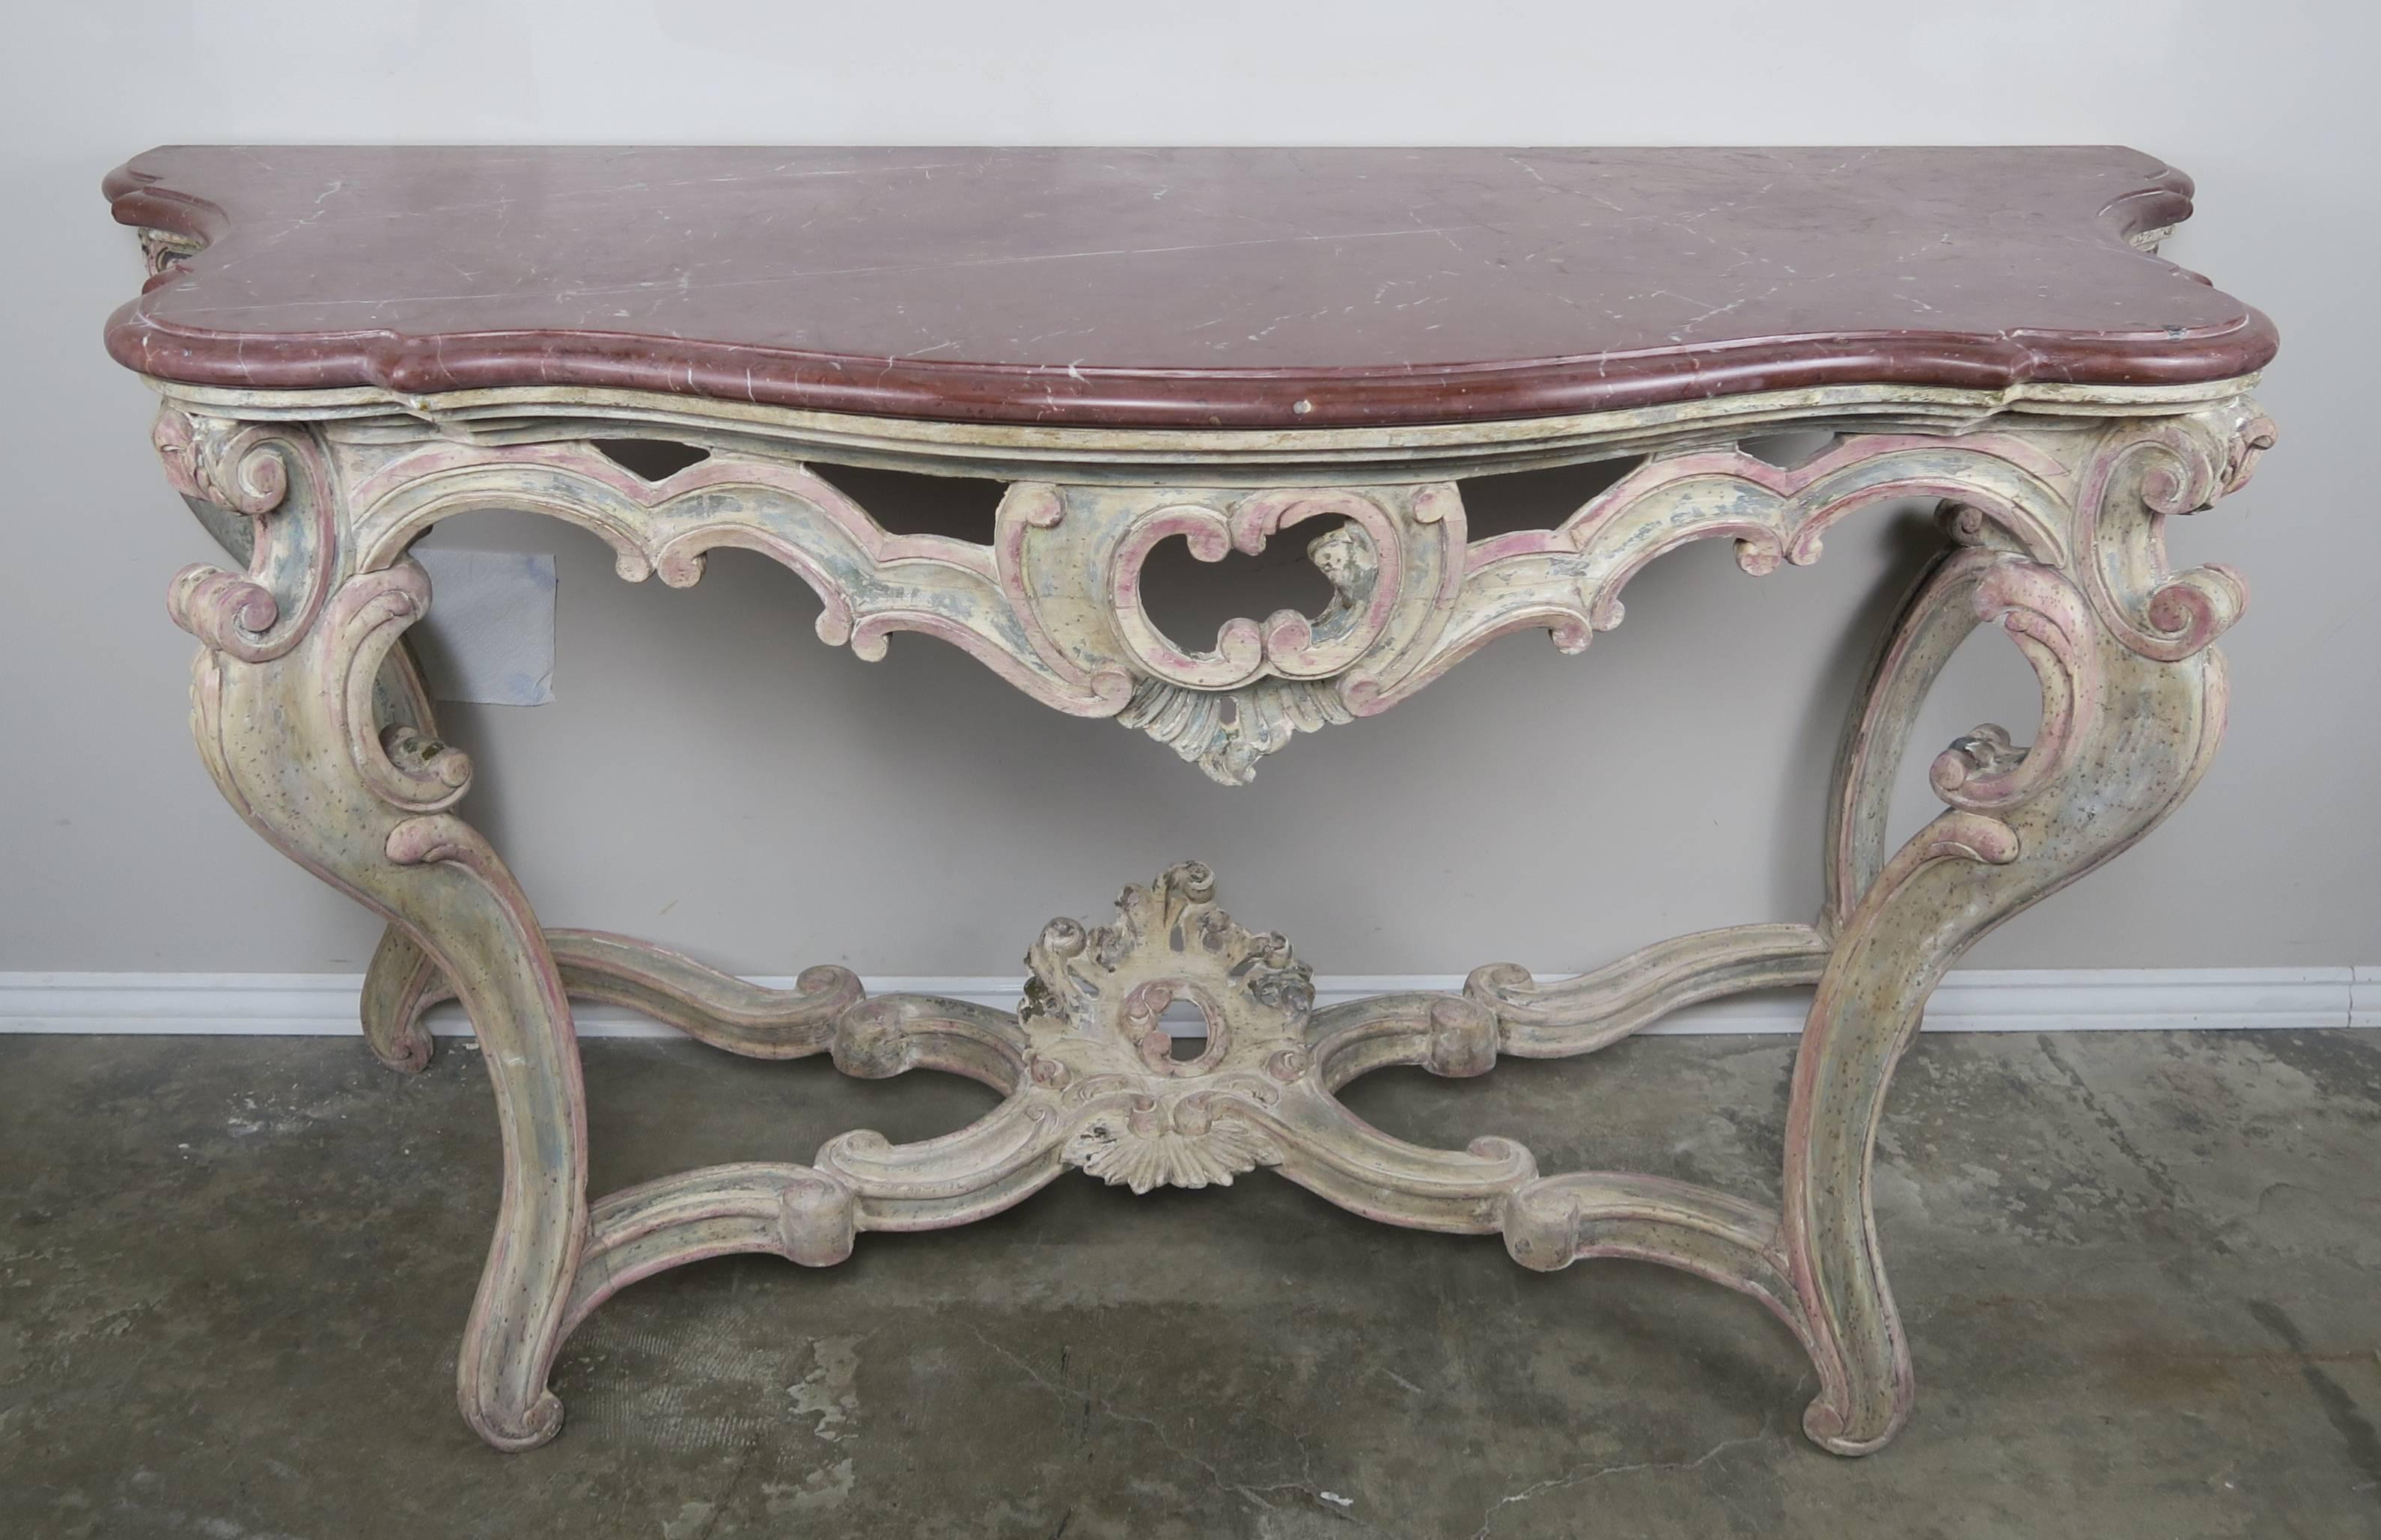 Pair of French 19th century Louis XV style carved walnut consoles with serpentine shaped honed terra cotta colored marble tops. The marble tops are finished with a single ogee, bullnose edge detail.